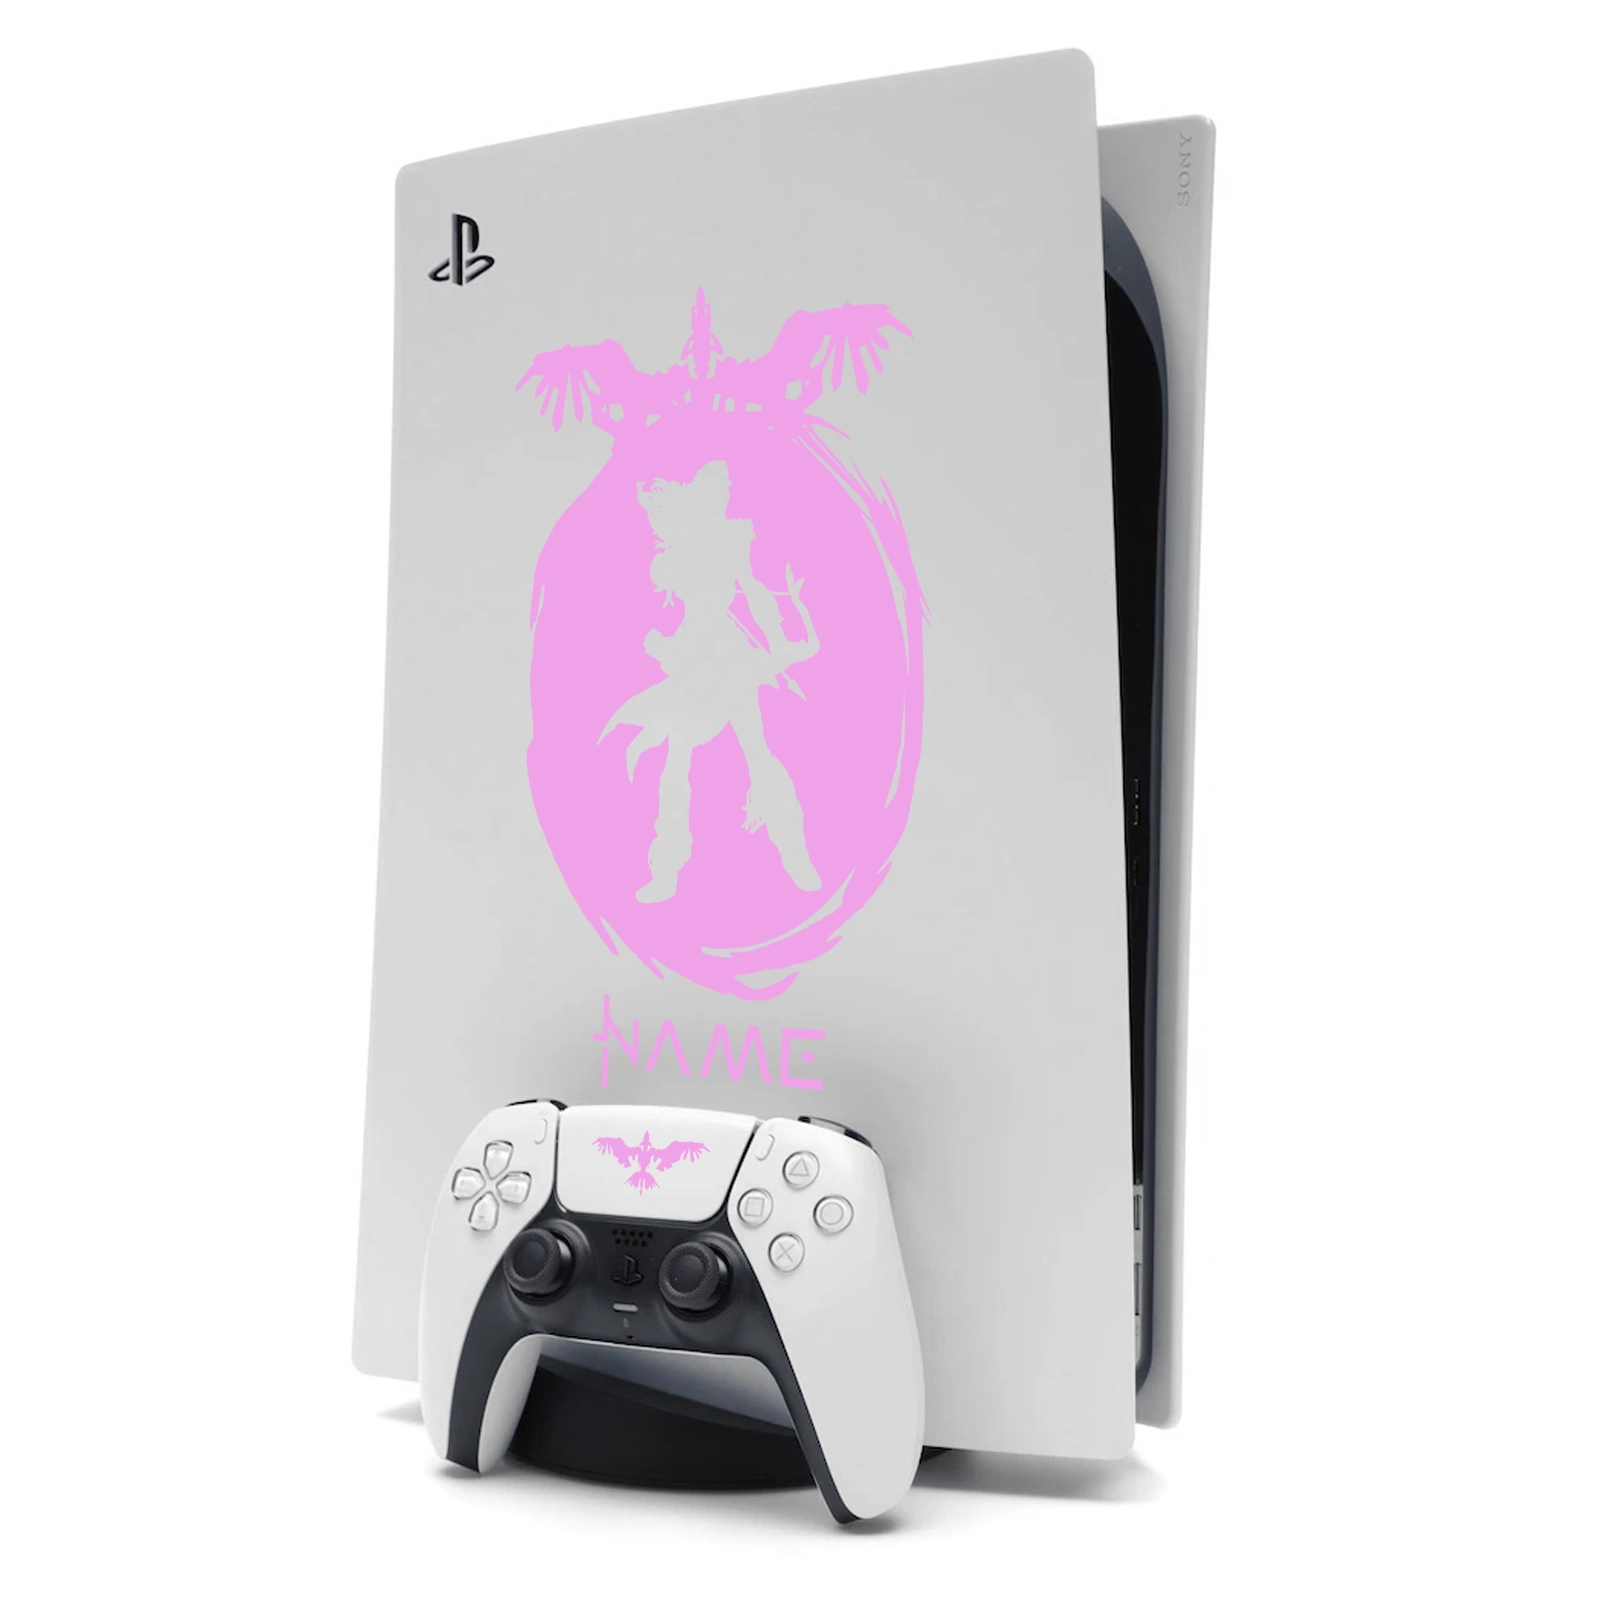 Horizon Aloy PS5 Sticker Skin for Playstation 5 in Pink